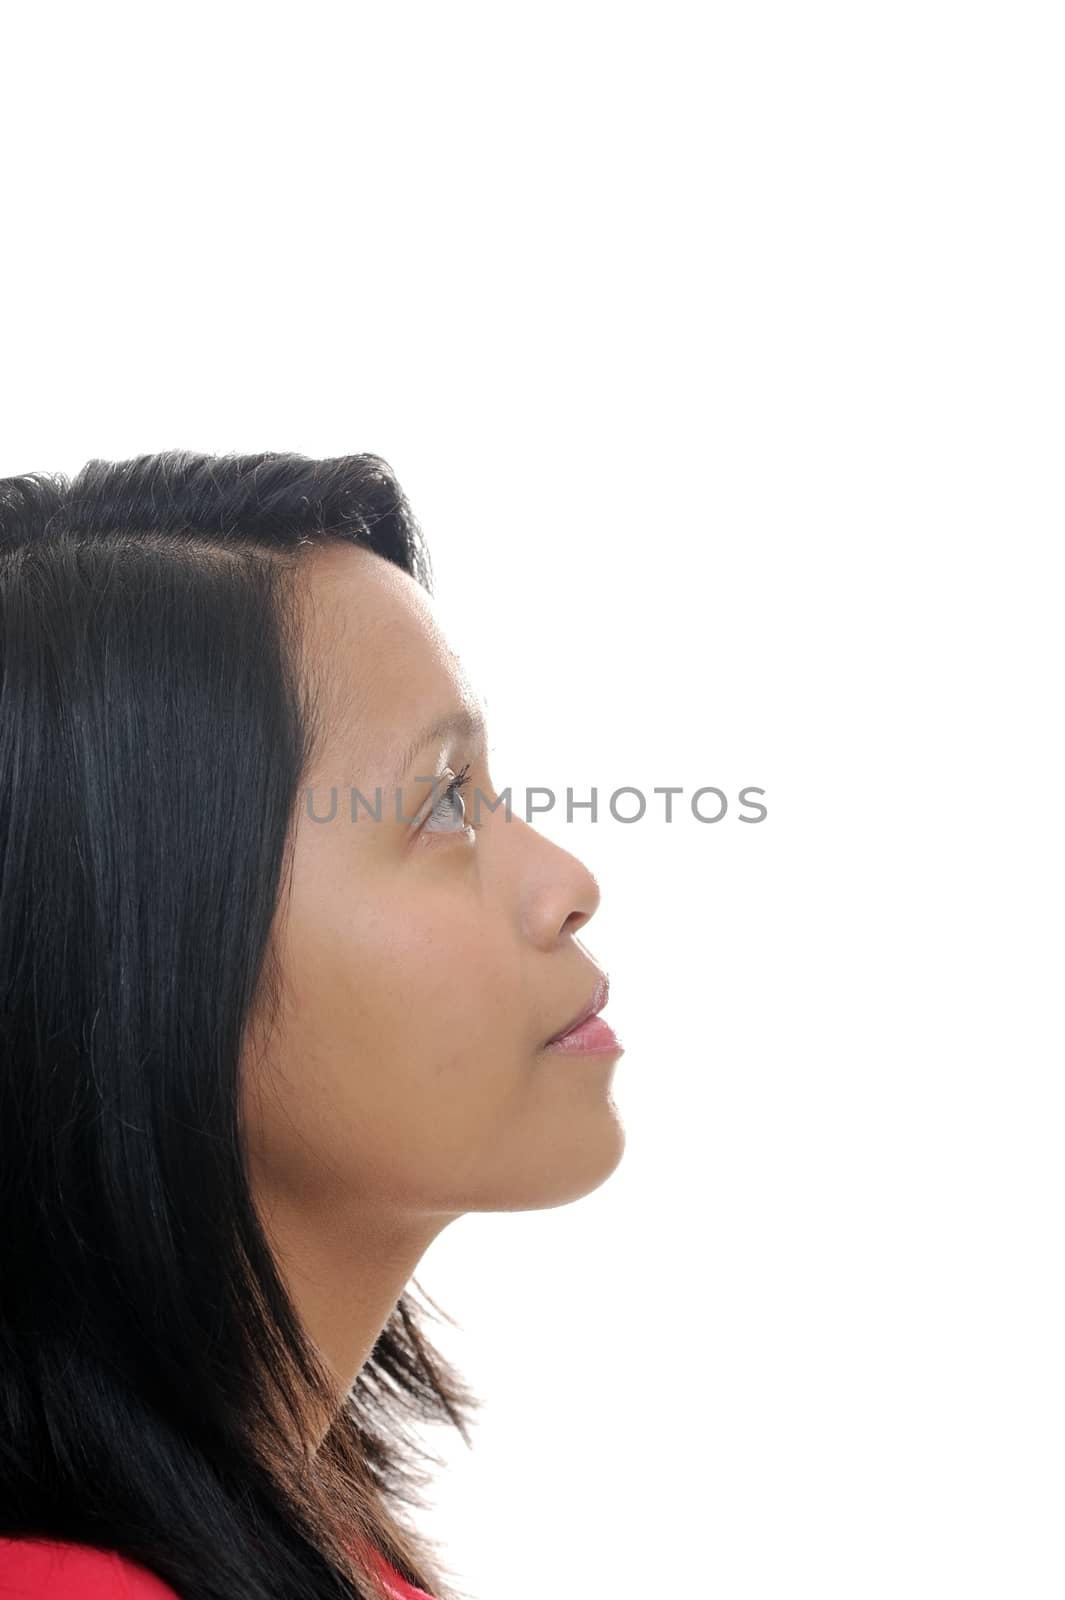 Girls profile by kmwphotography